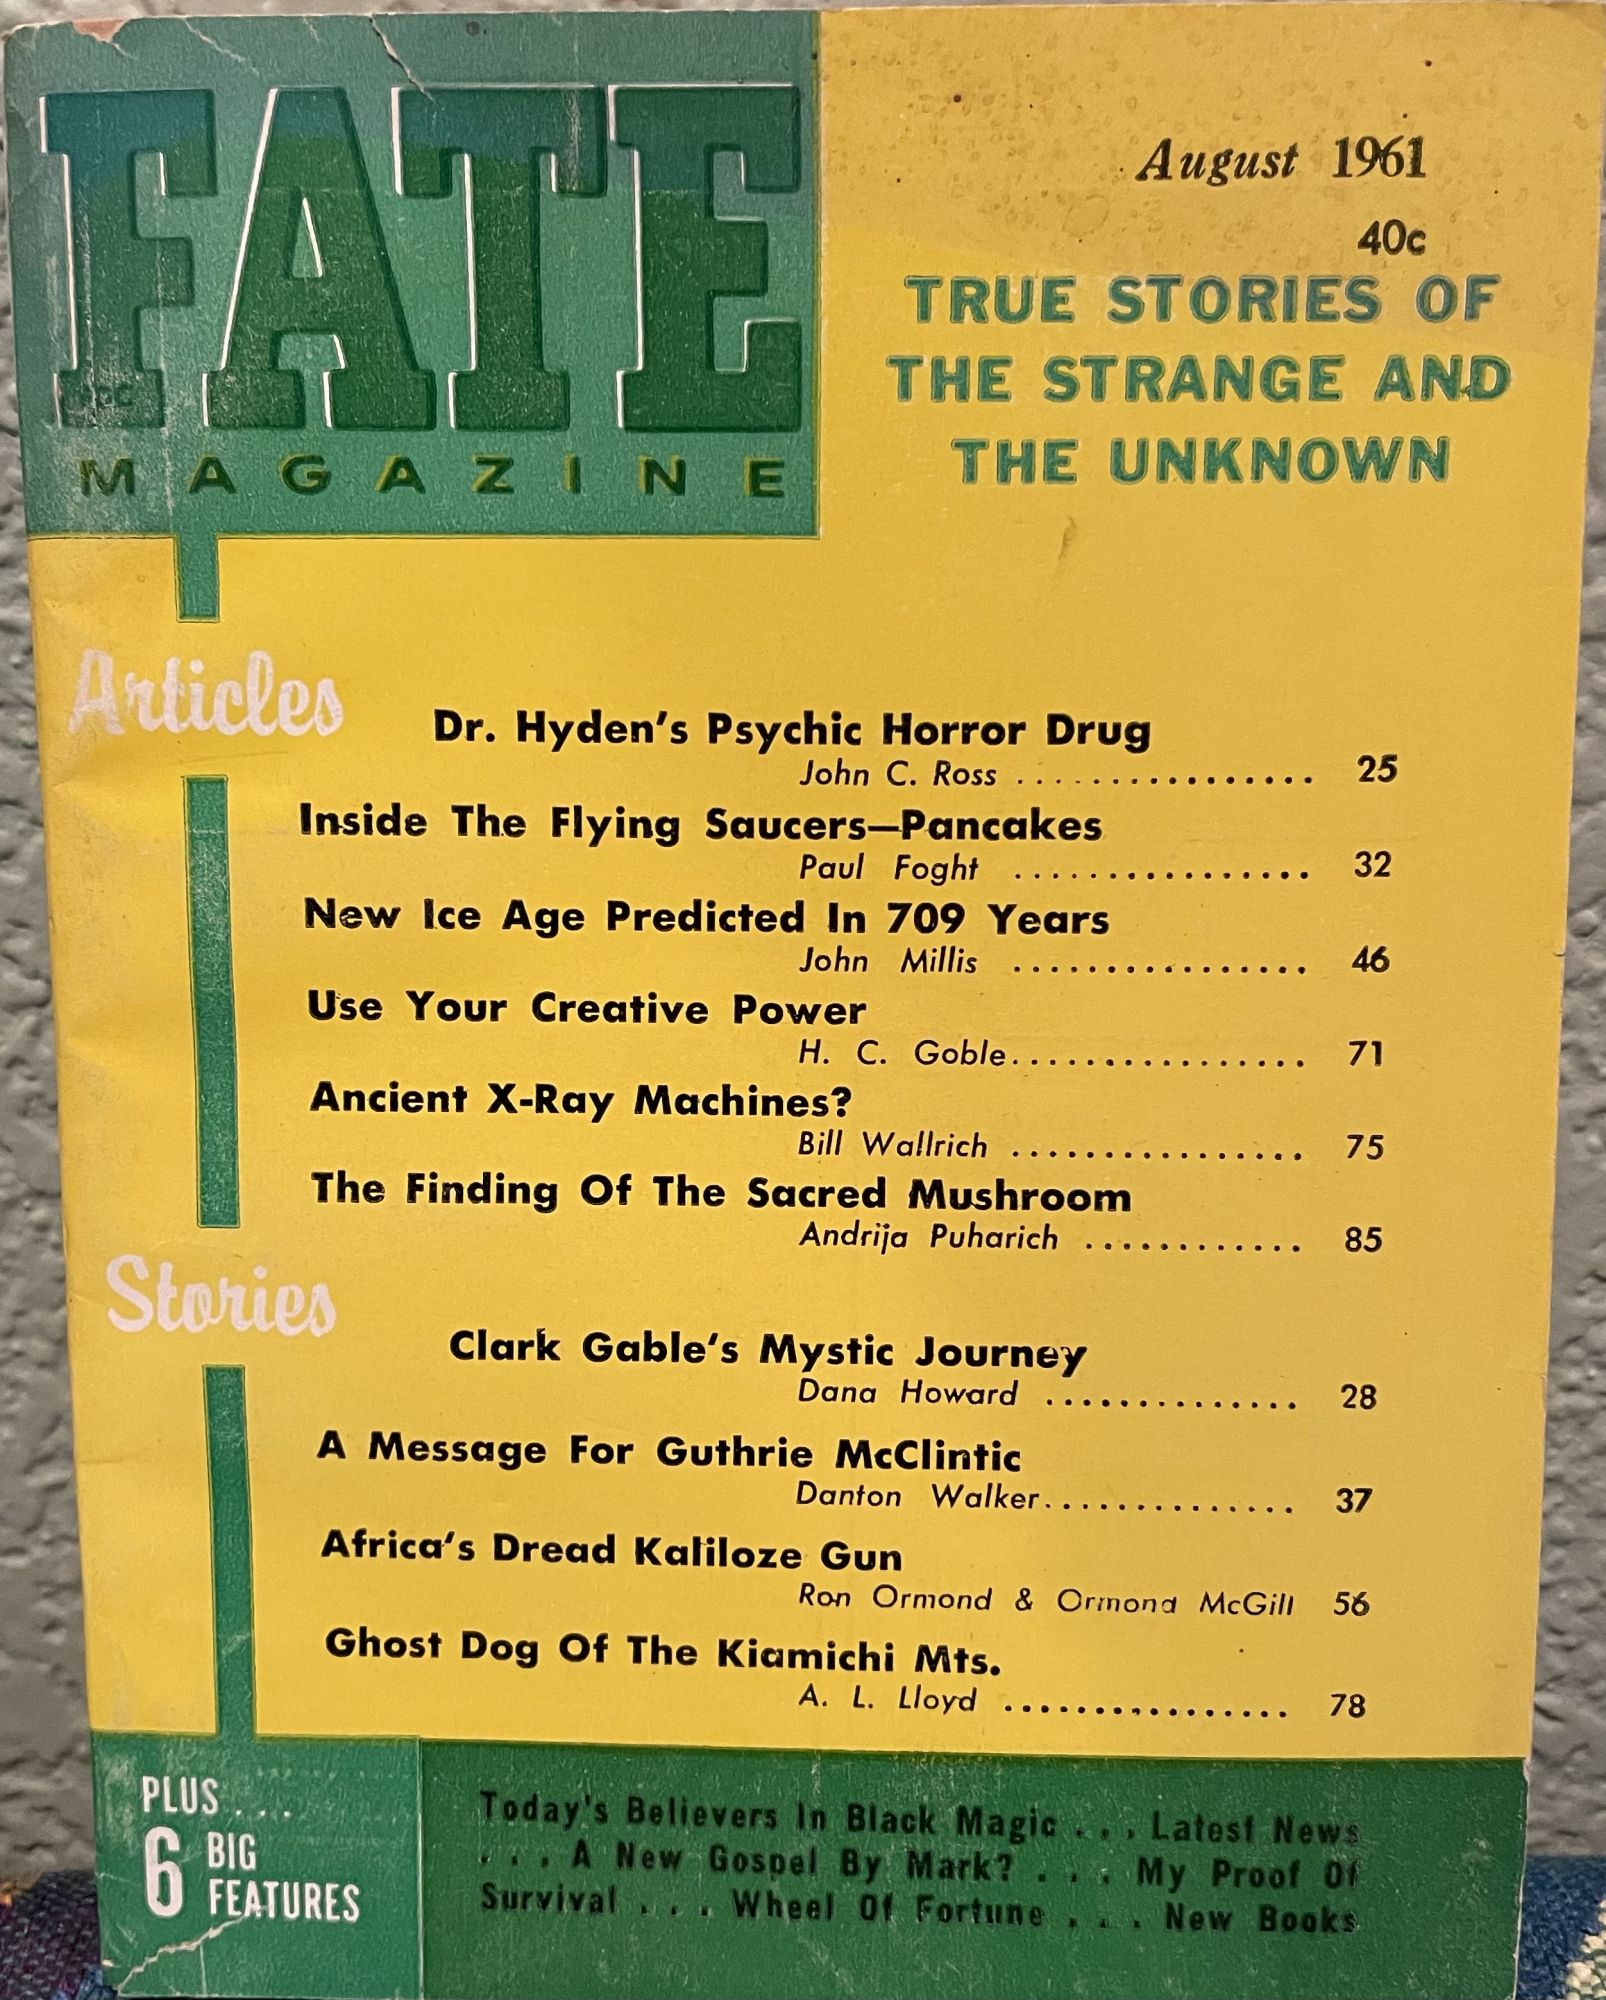 Fate Magazine True Stories of the Strange and the Unknown August 1961 Vol 14 No 8 Issue 137. Mary Fuller.